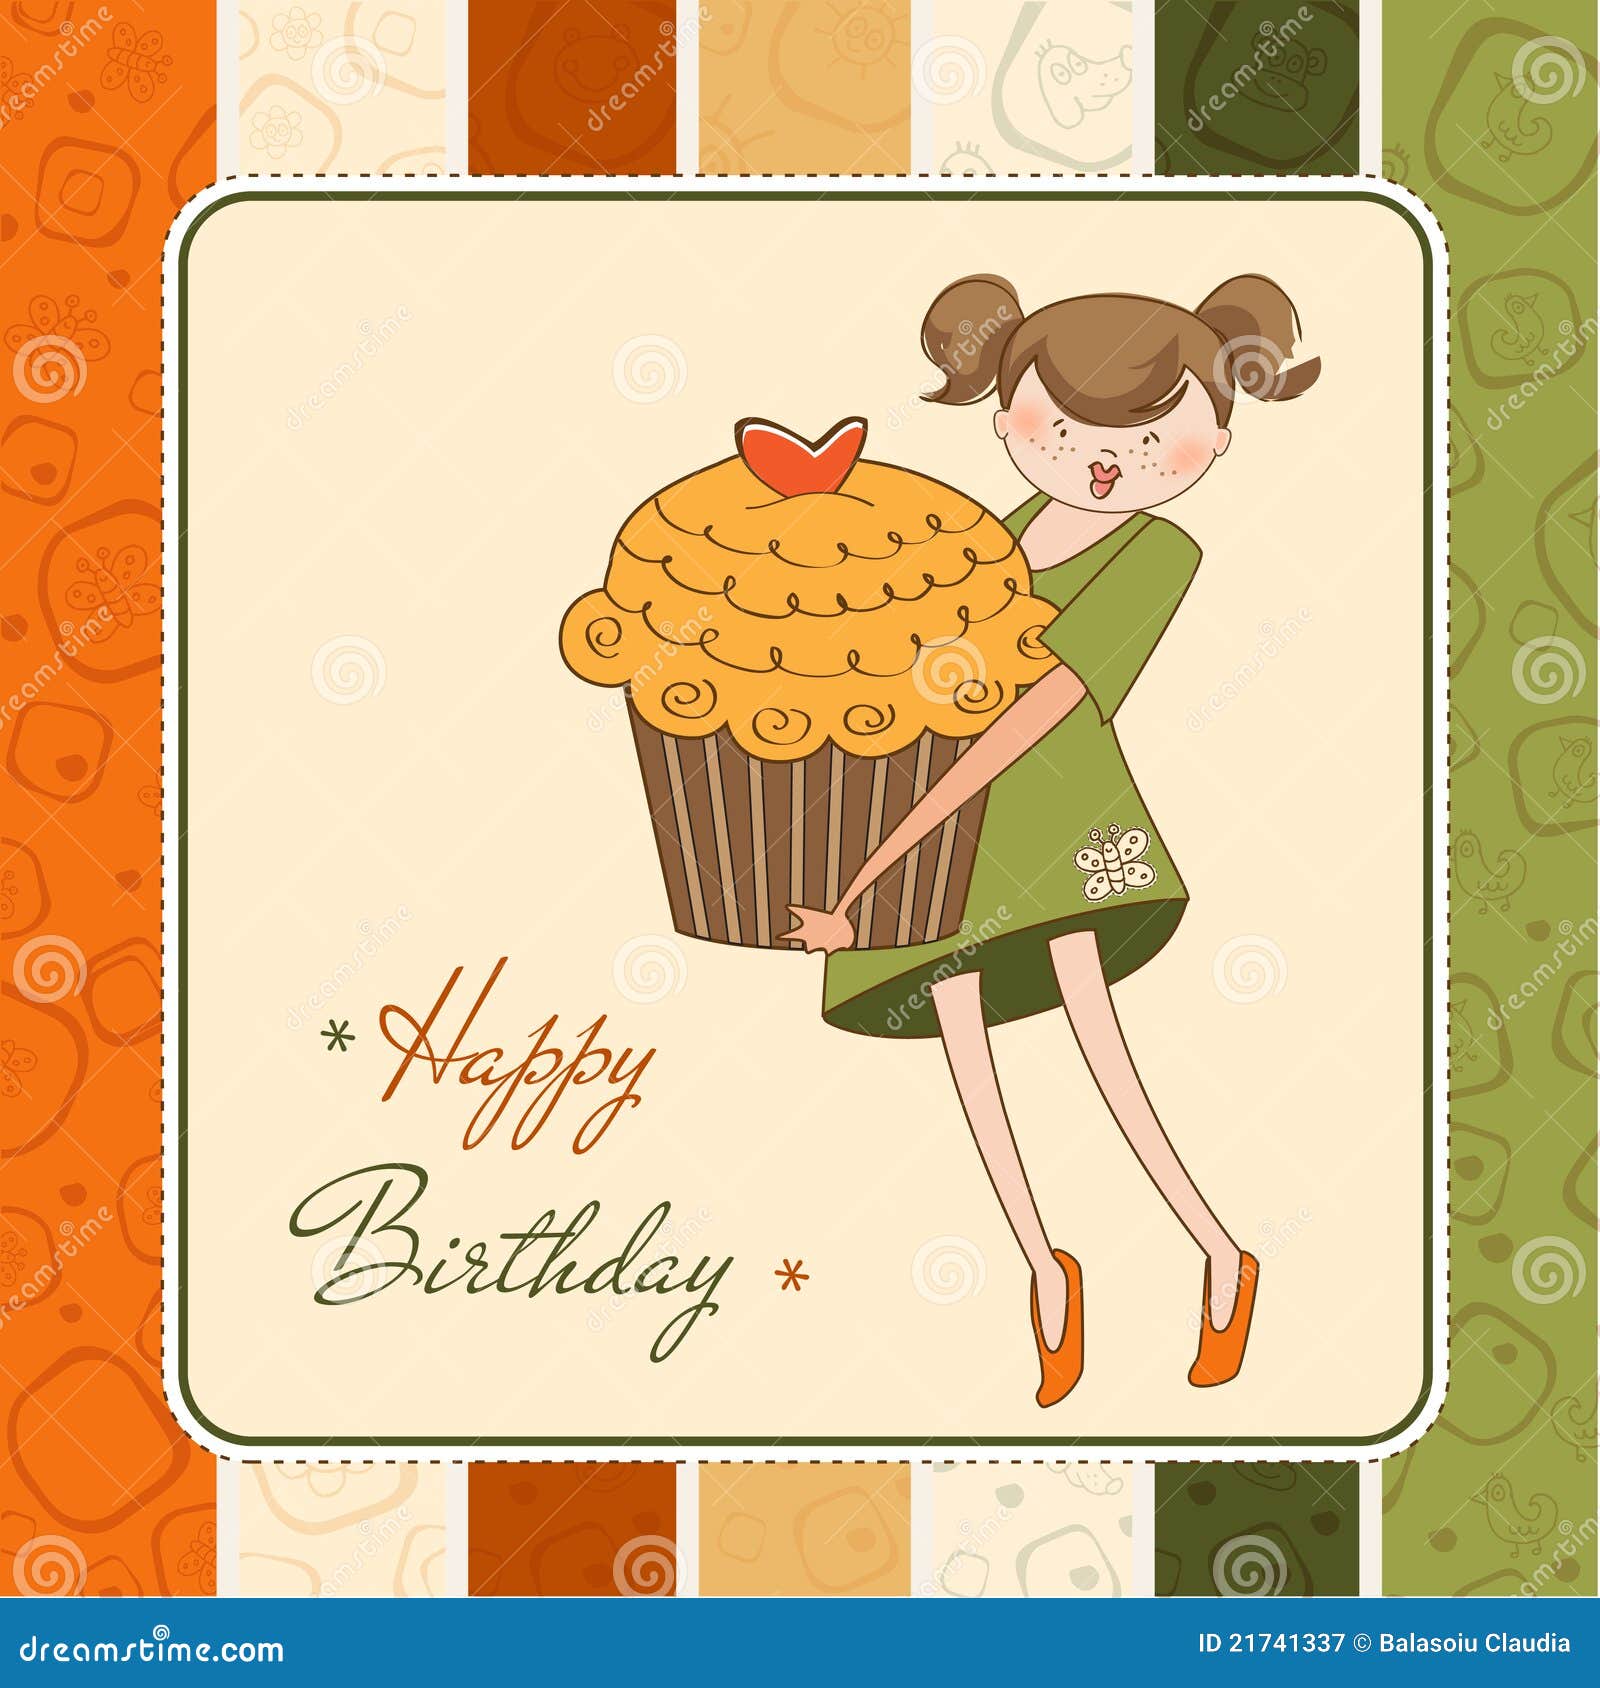 Birthday Card With Funny Girl And Cupcake Royalty Free ...